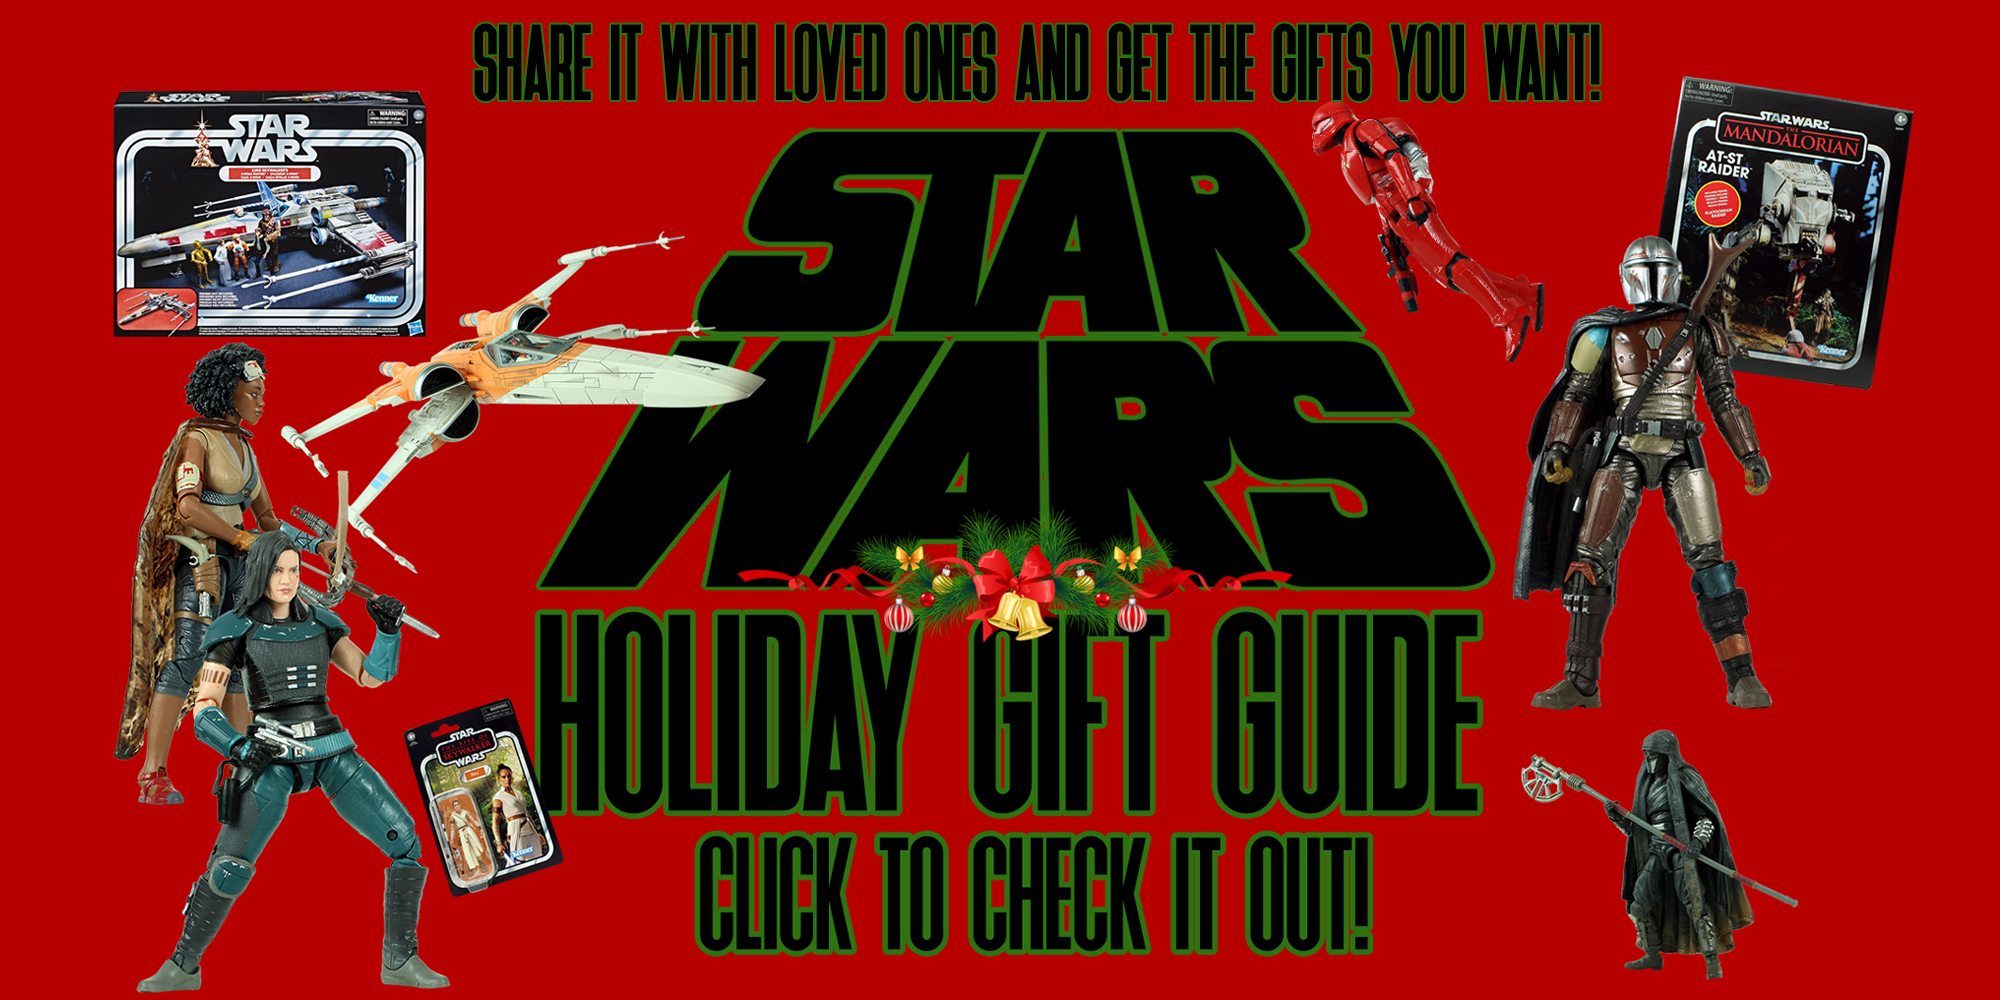 Star Wars Gift Guide 2019